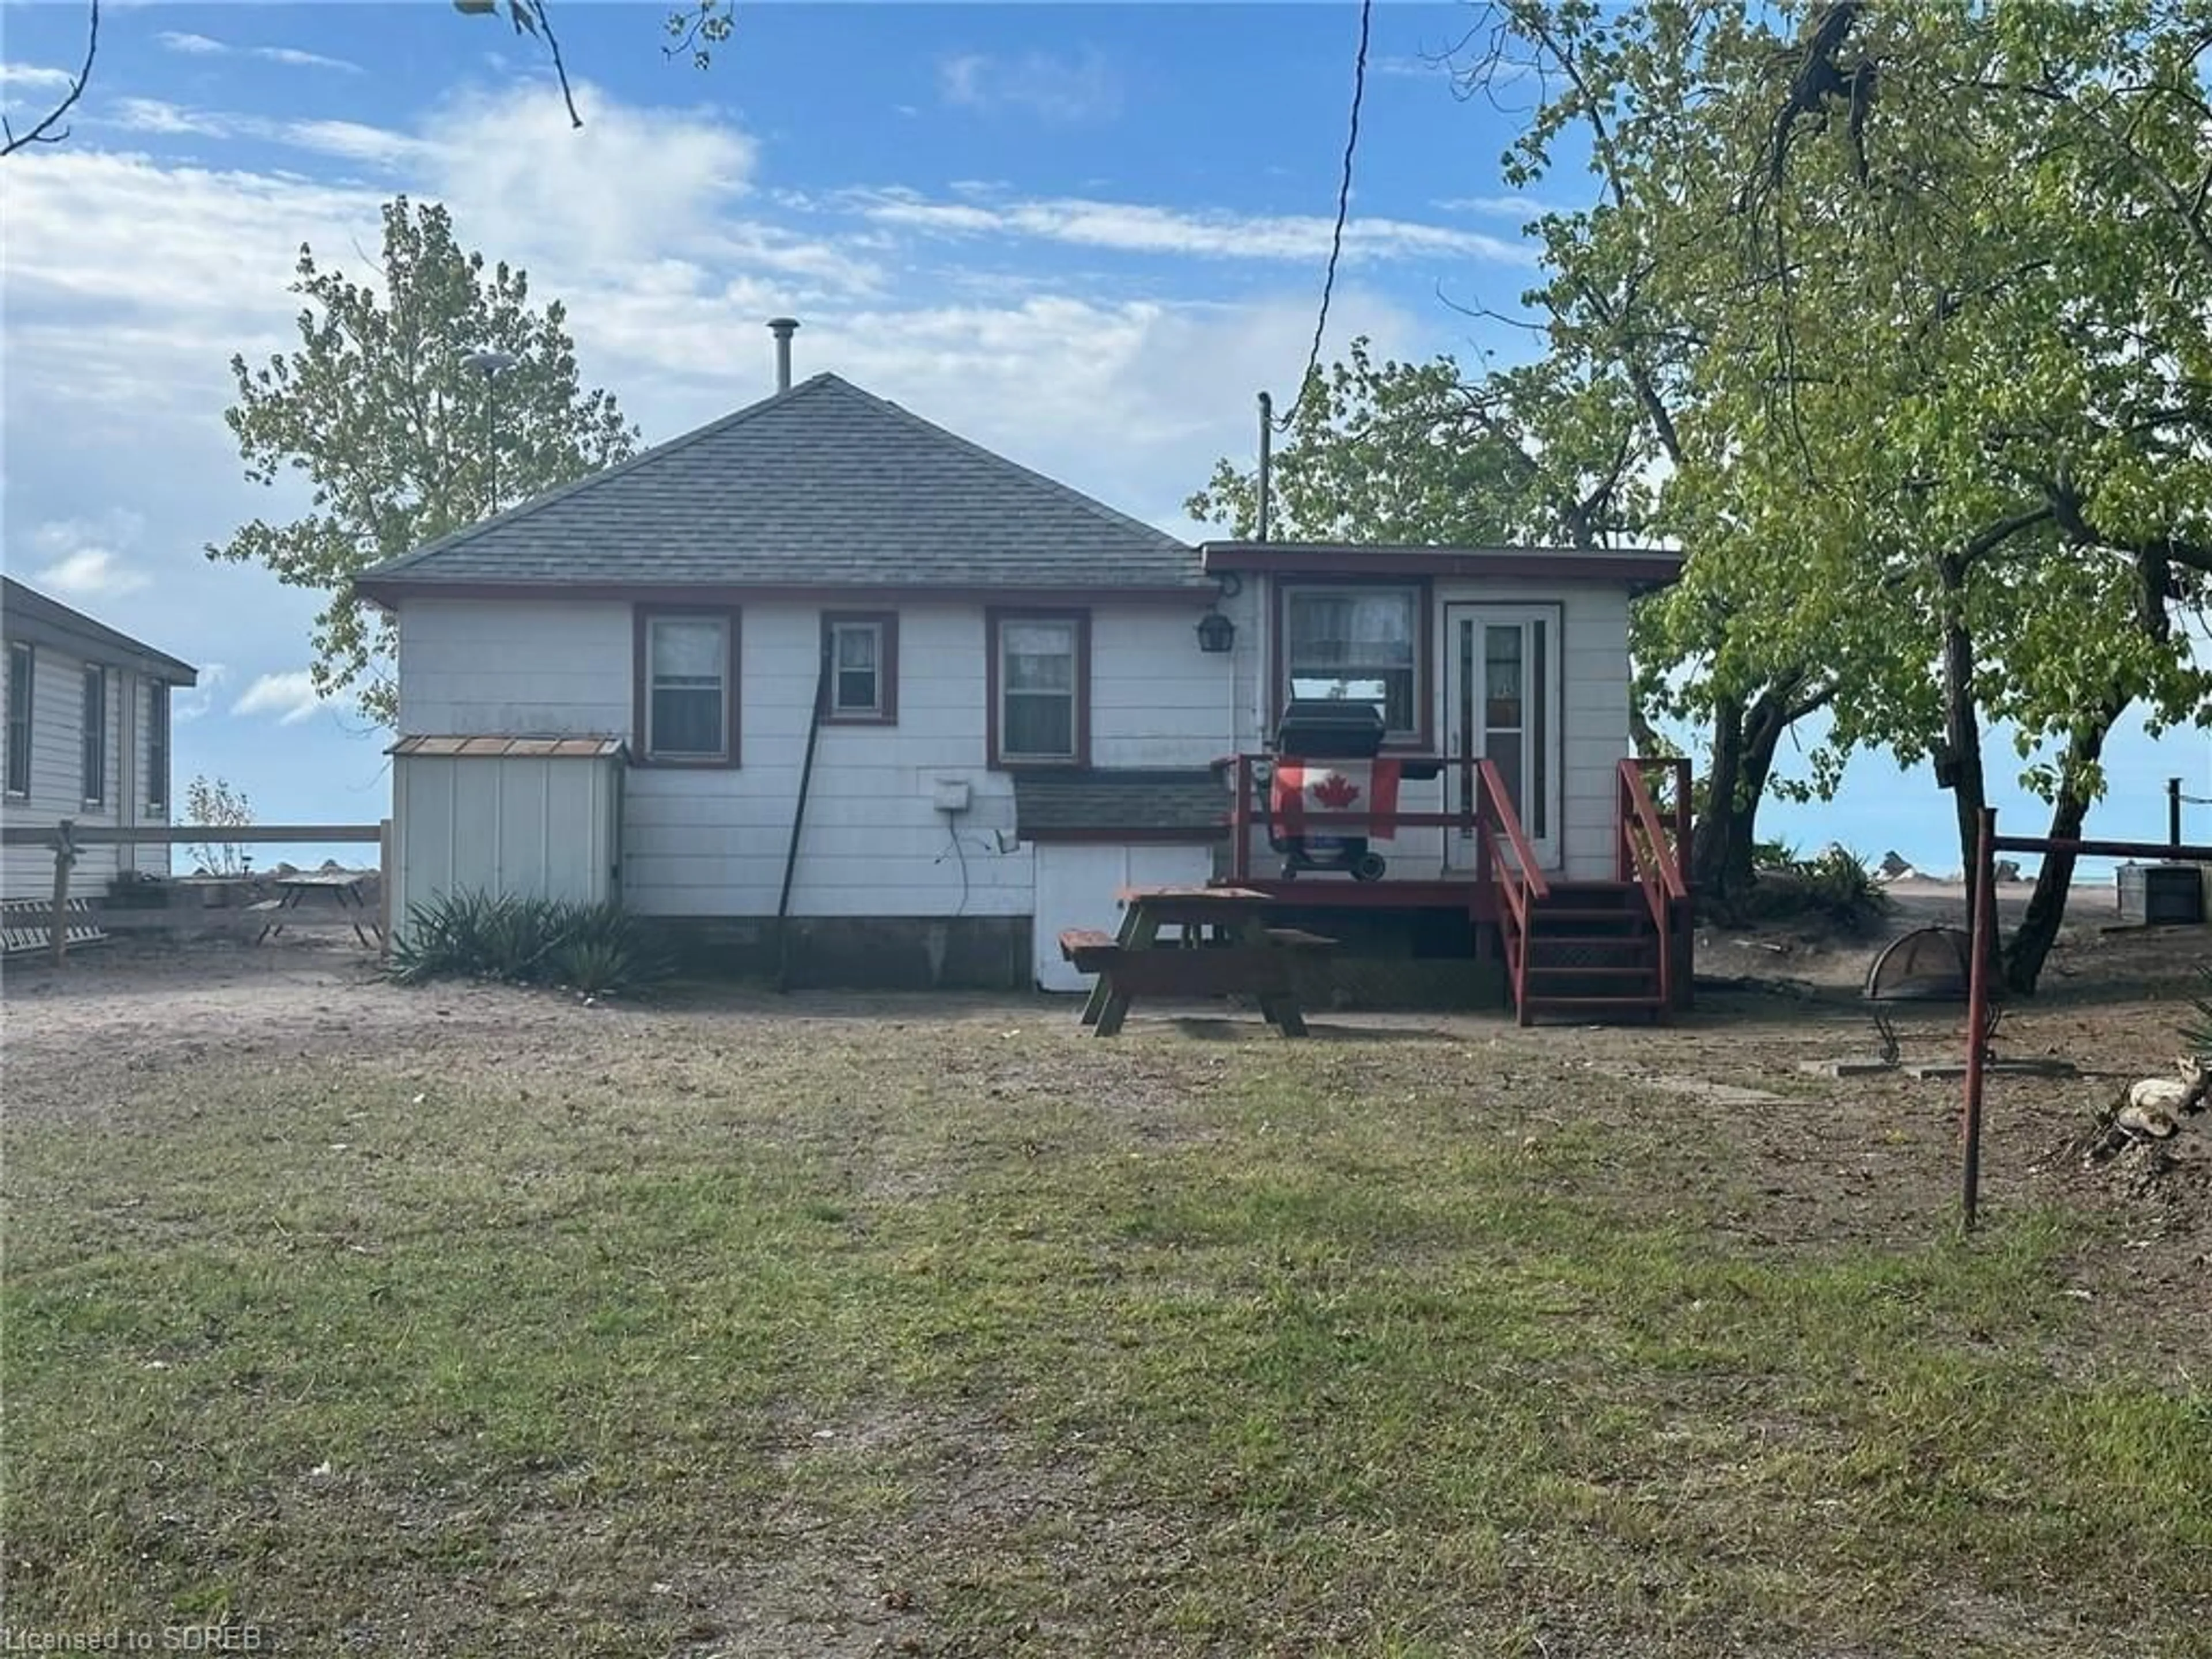 Cottage for 95 Erie Blvd, Long Point Ontario N0E 1M0